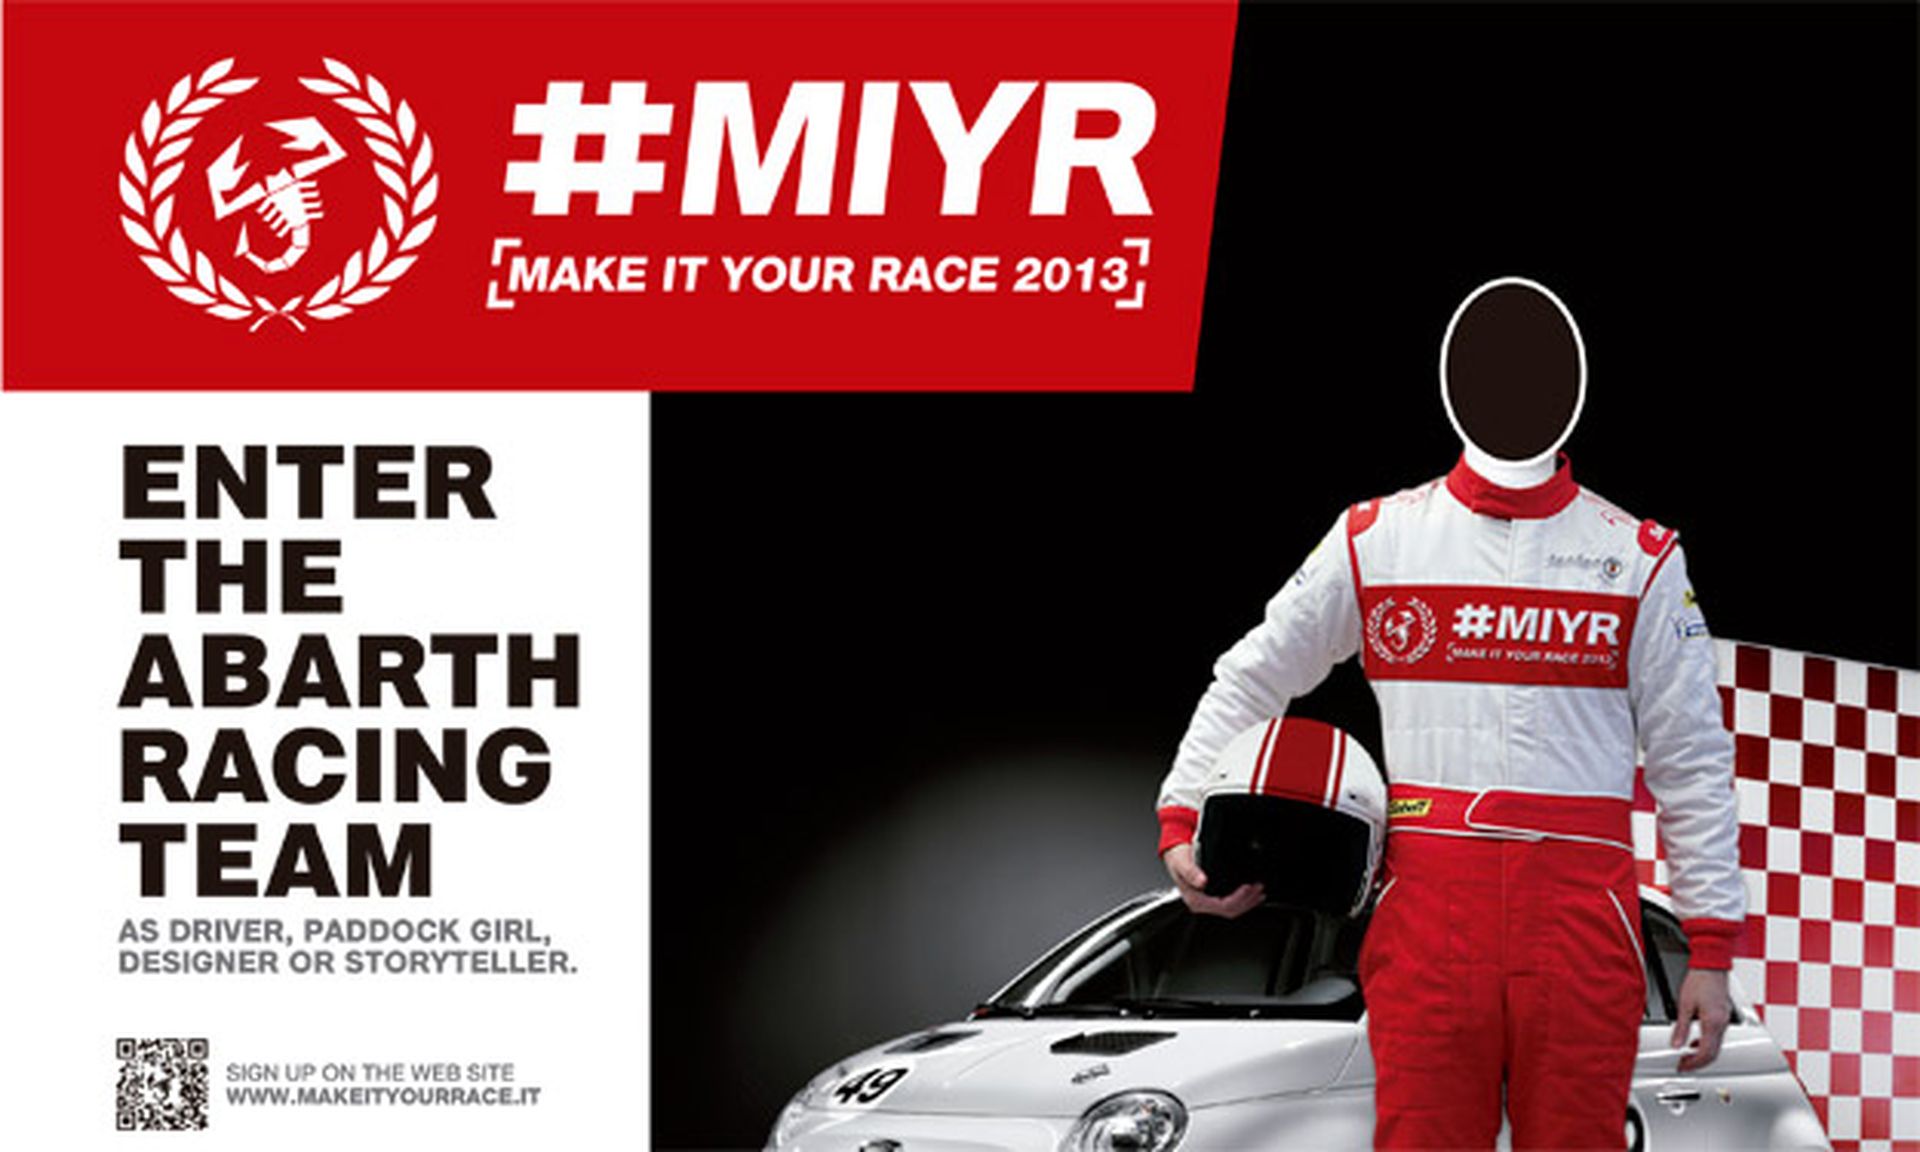 Abarth Make It Your Race 2013 busca